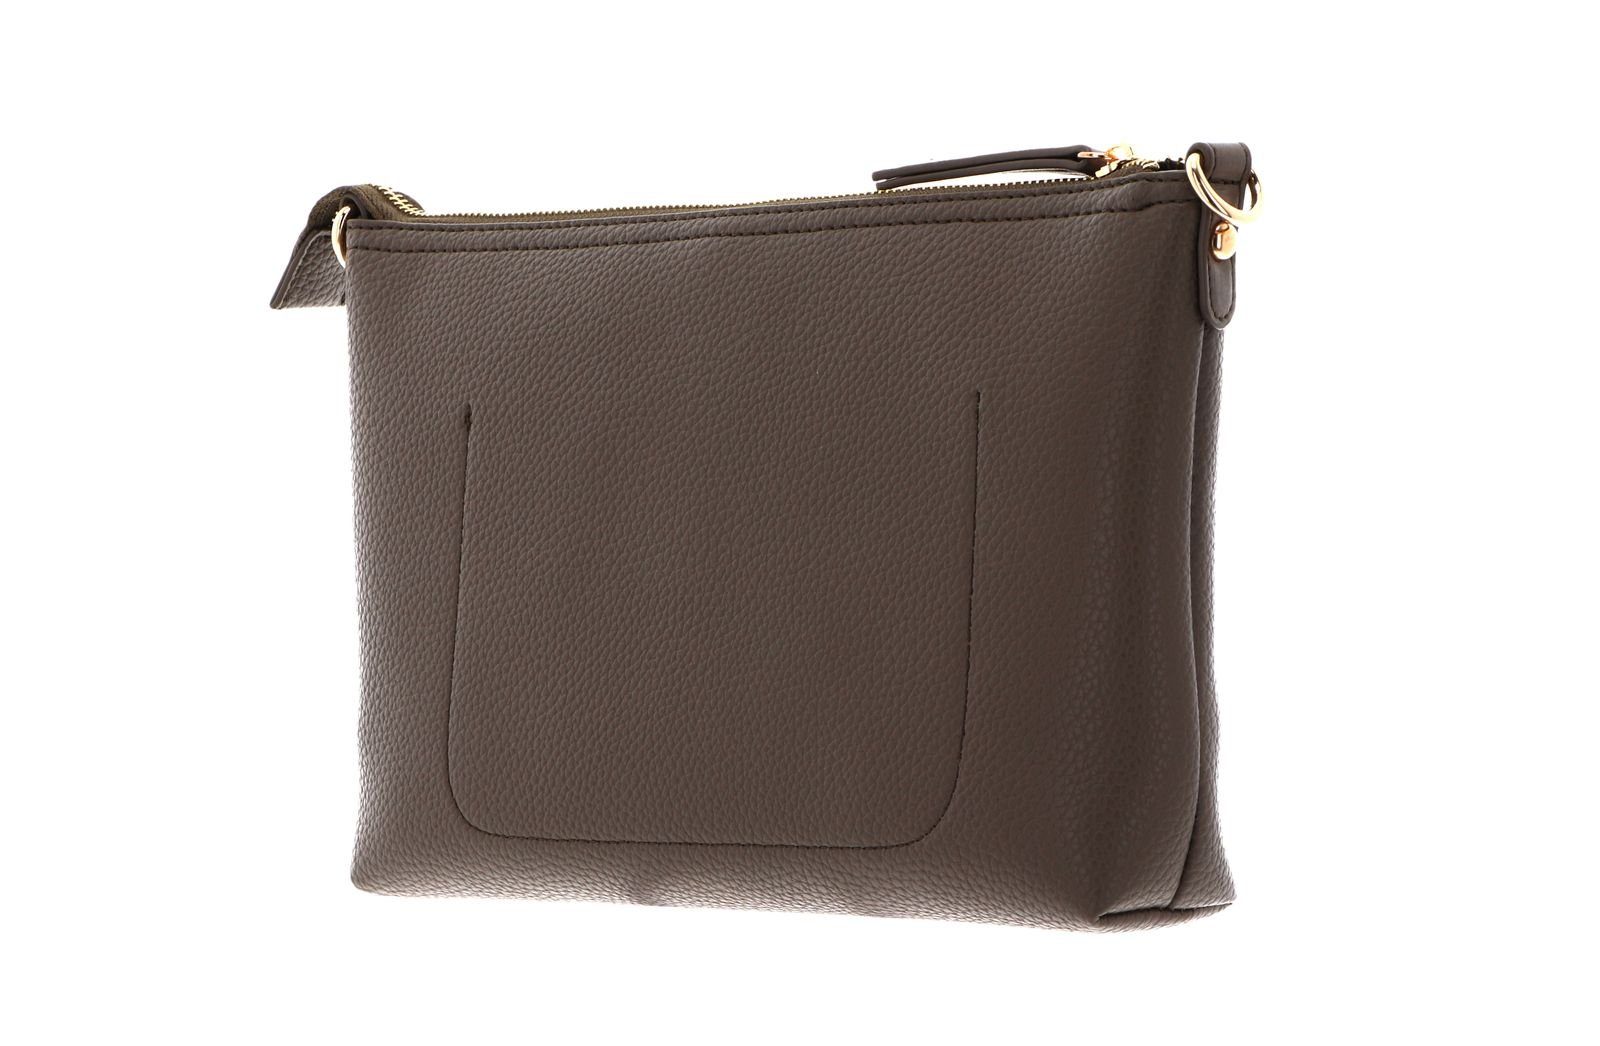 VALENTINO BAGS Clutch Willow Taupe